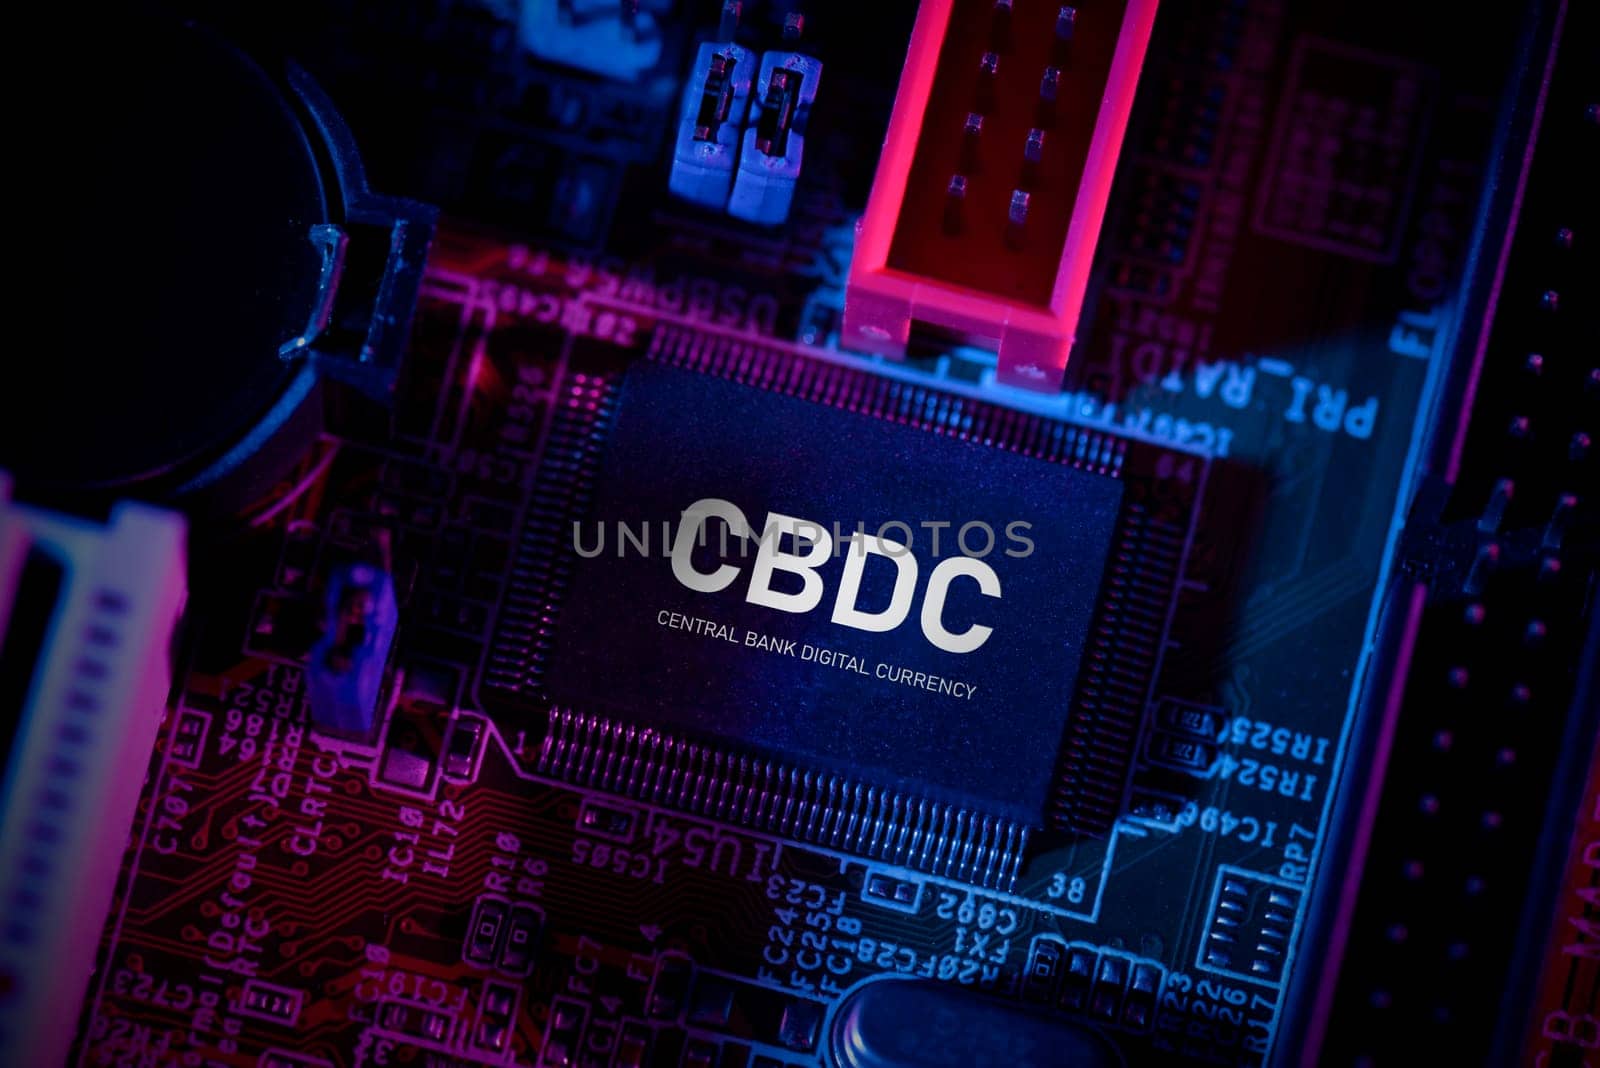 CBDC - central bank digital currency technology by simpson33